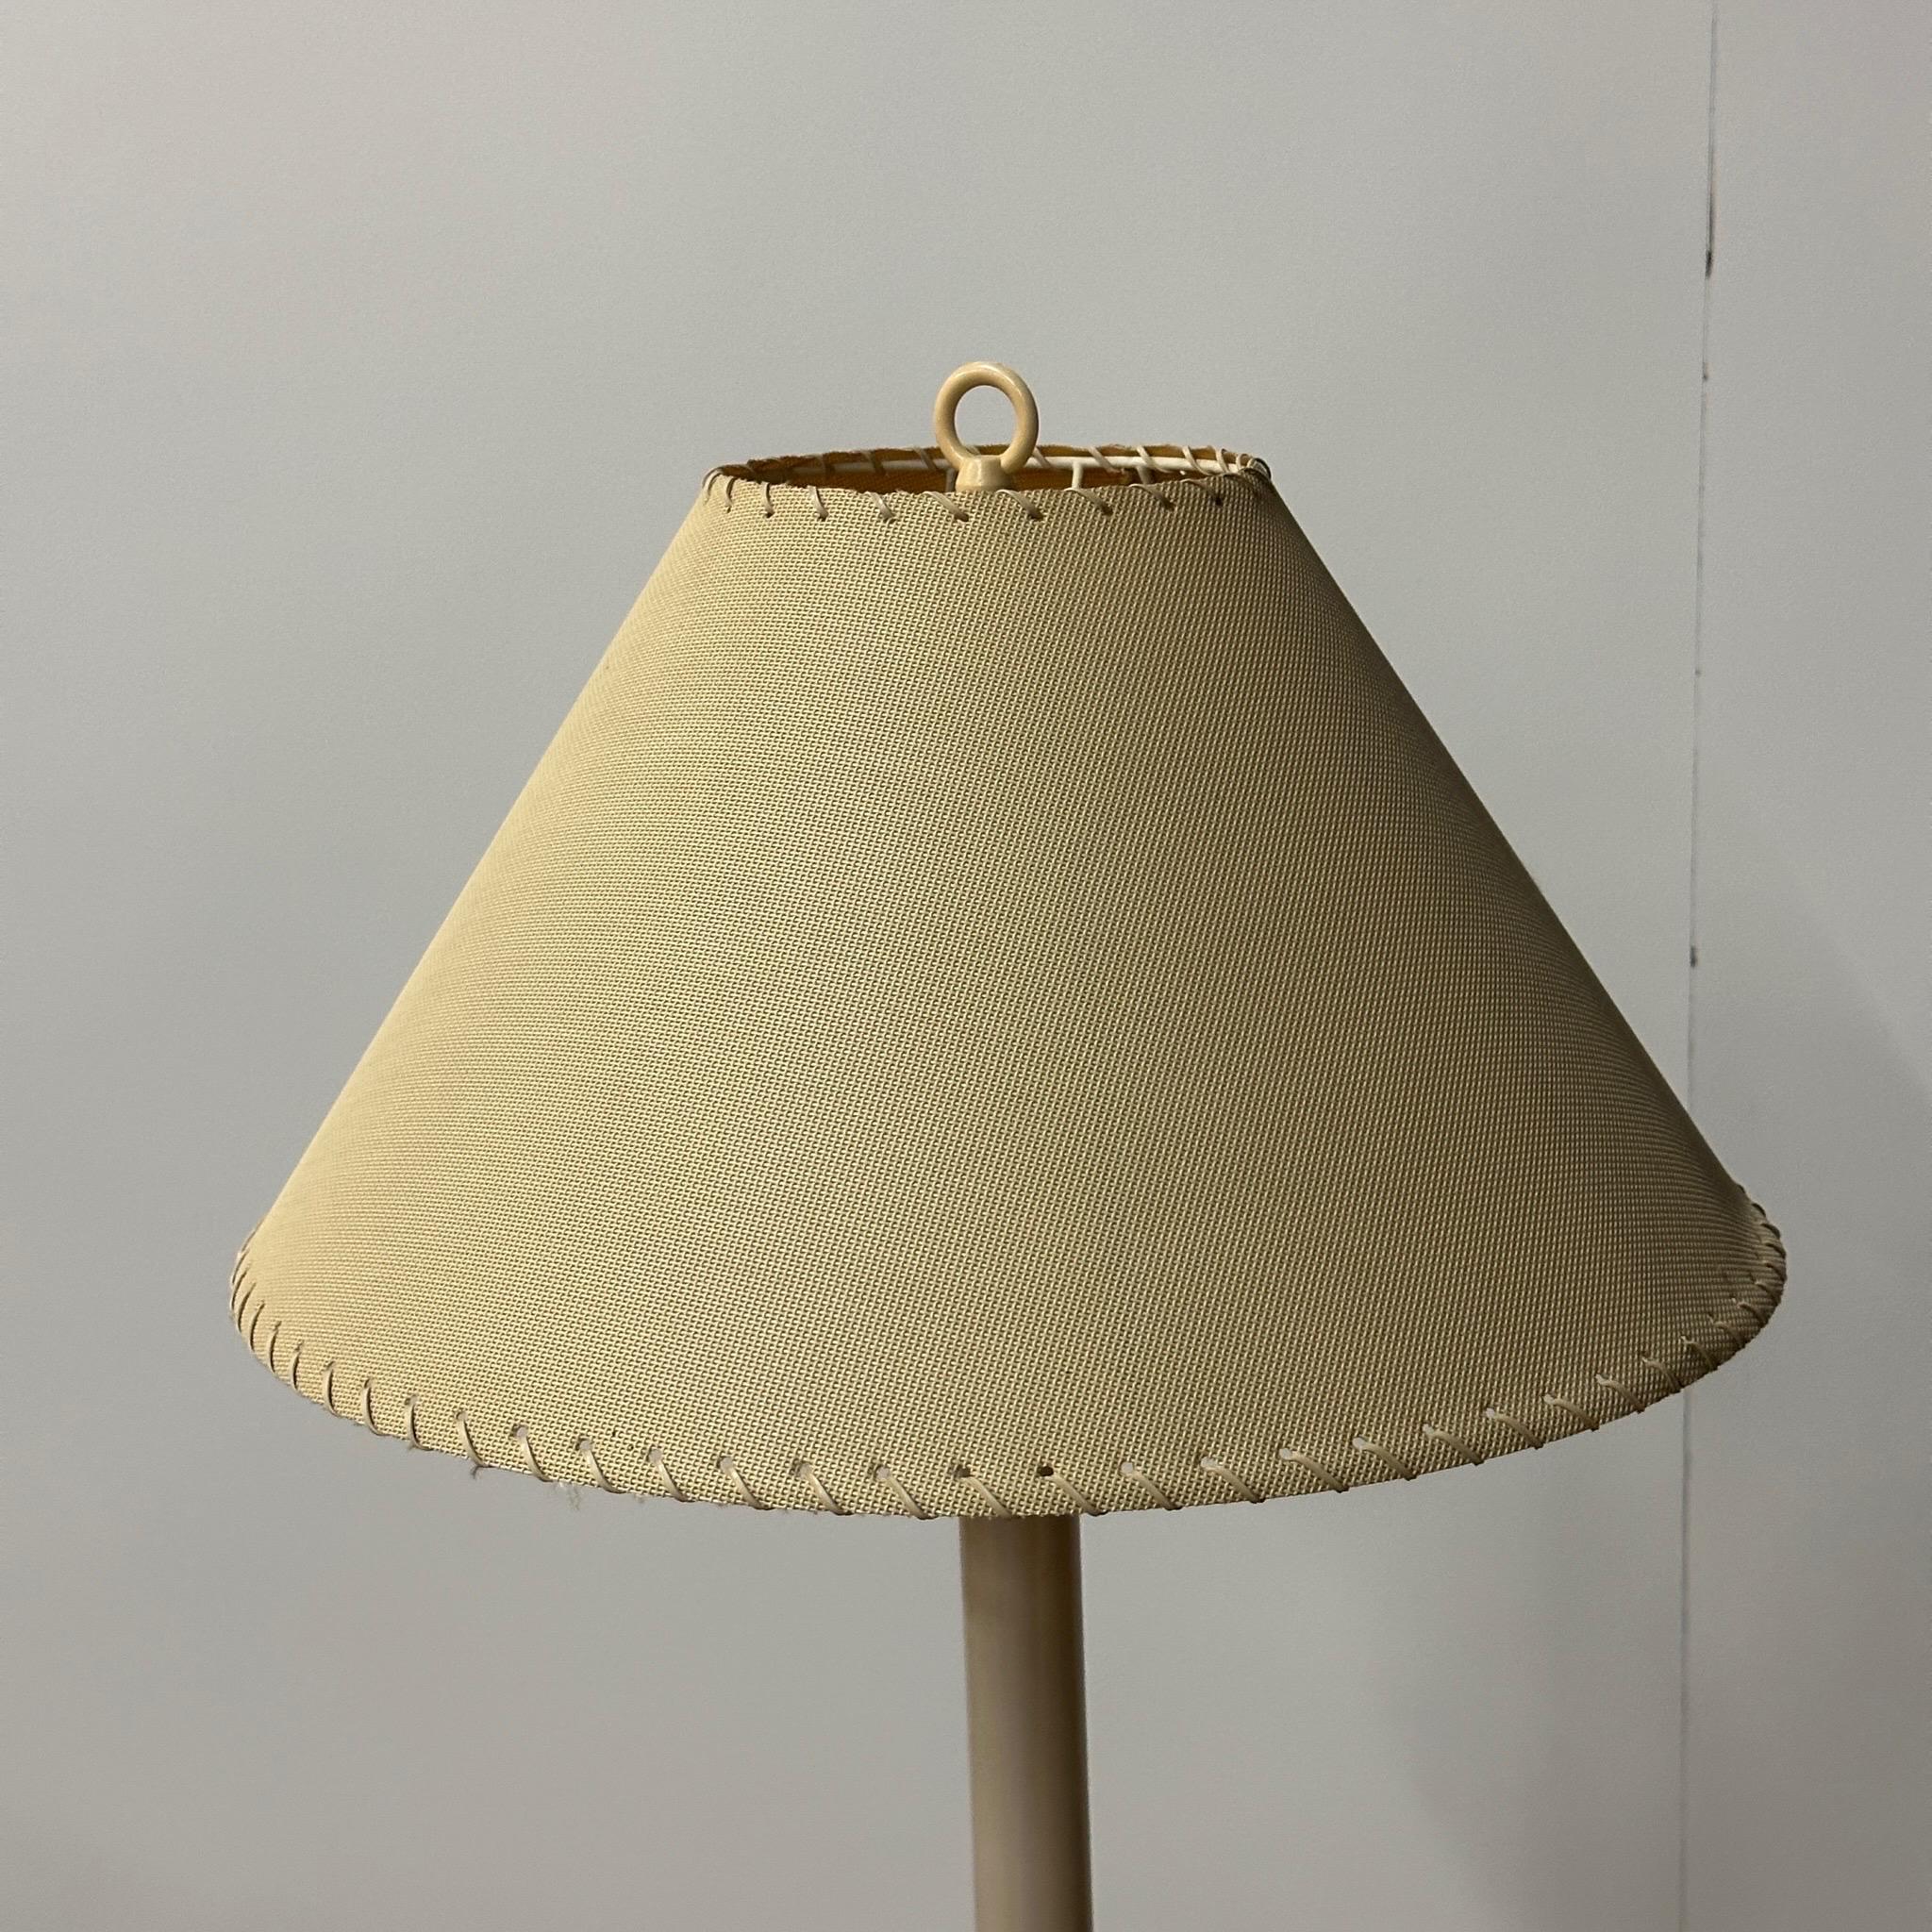 One floor lamp and one table lamp. Indoor or outdoor use.

Floor Lamp Dim - 12.5” Dia x 52” H
Table Lamp Dim - 8.5” Dia x 32” H

Price is for the set. Contact us if you'd like to purchase a single item.